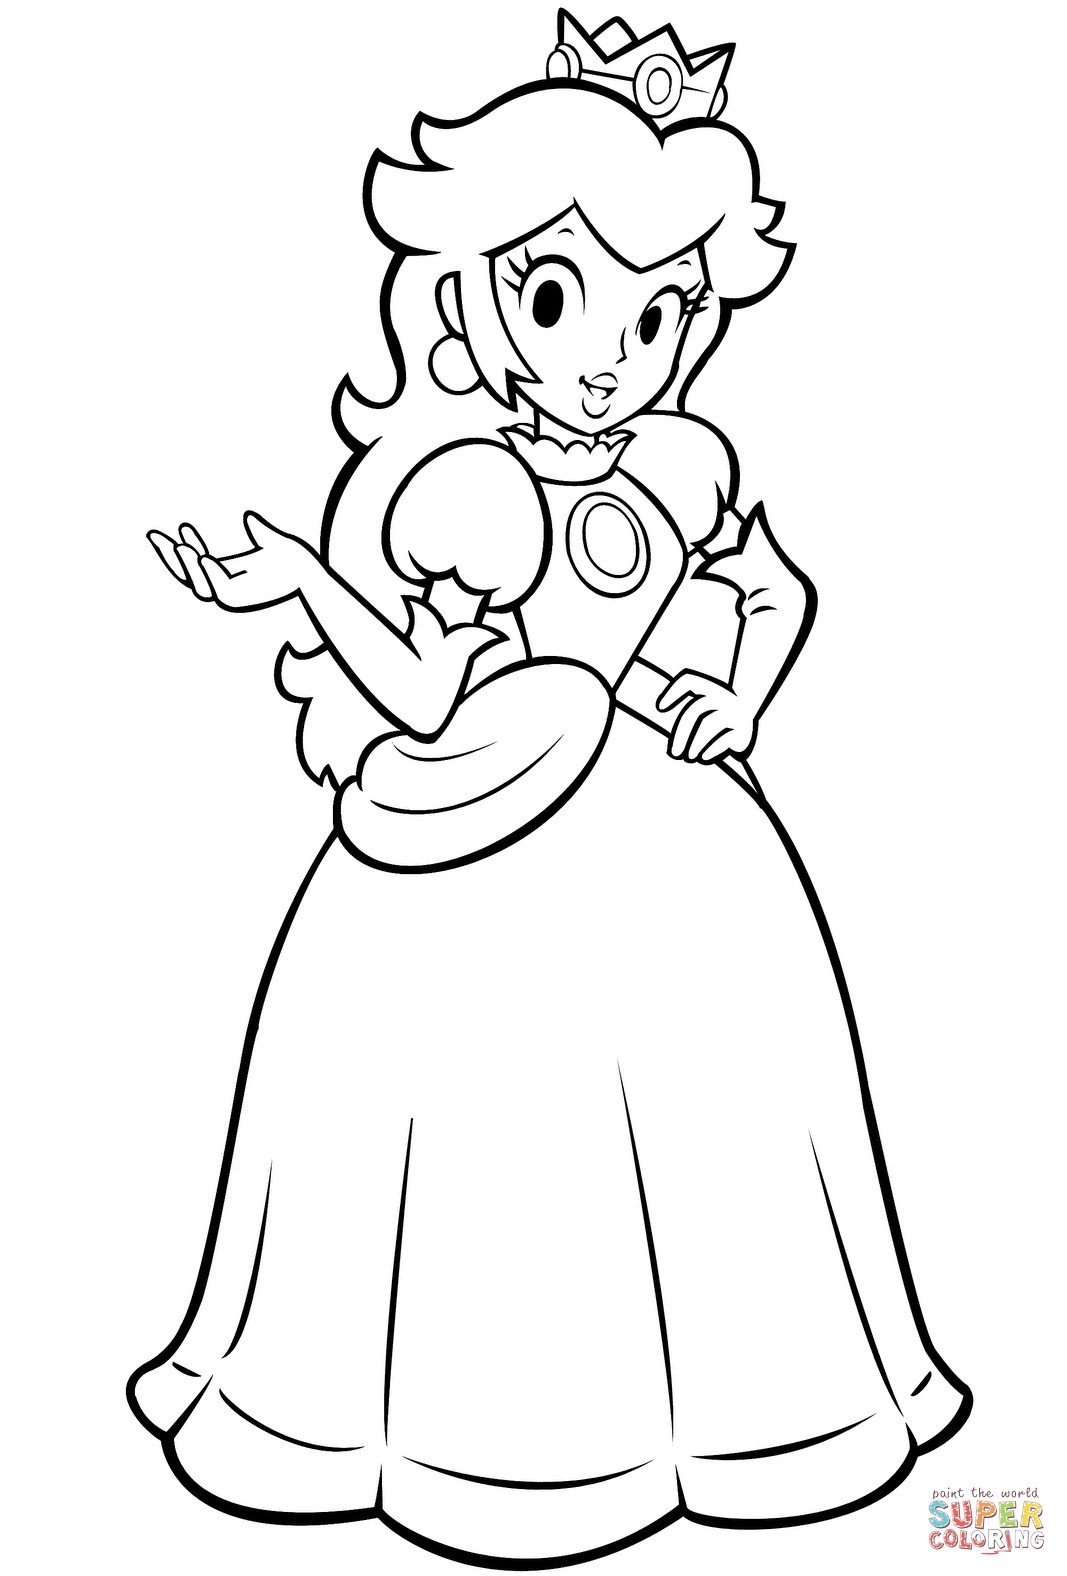 Free Mario Coloring Pages New Paper Mario Coloring Pages Unique Princess Peach Coloring Page Free